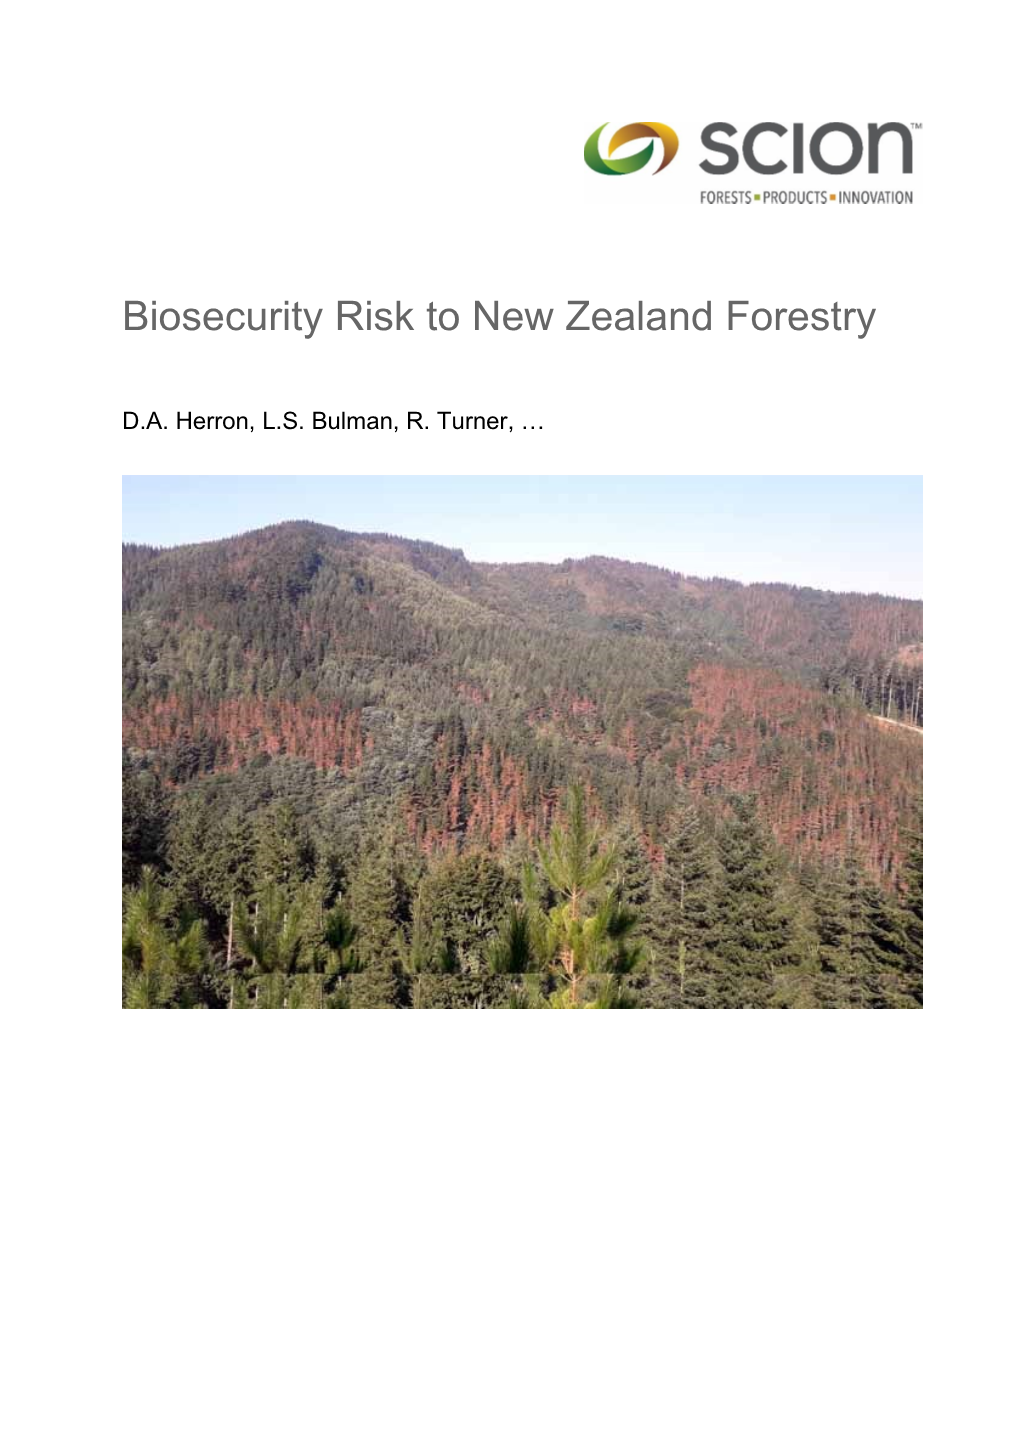 Biosecurity Risk to New Zealand Forestry